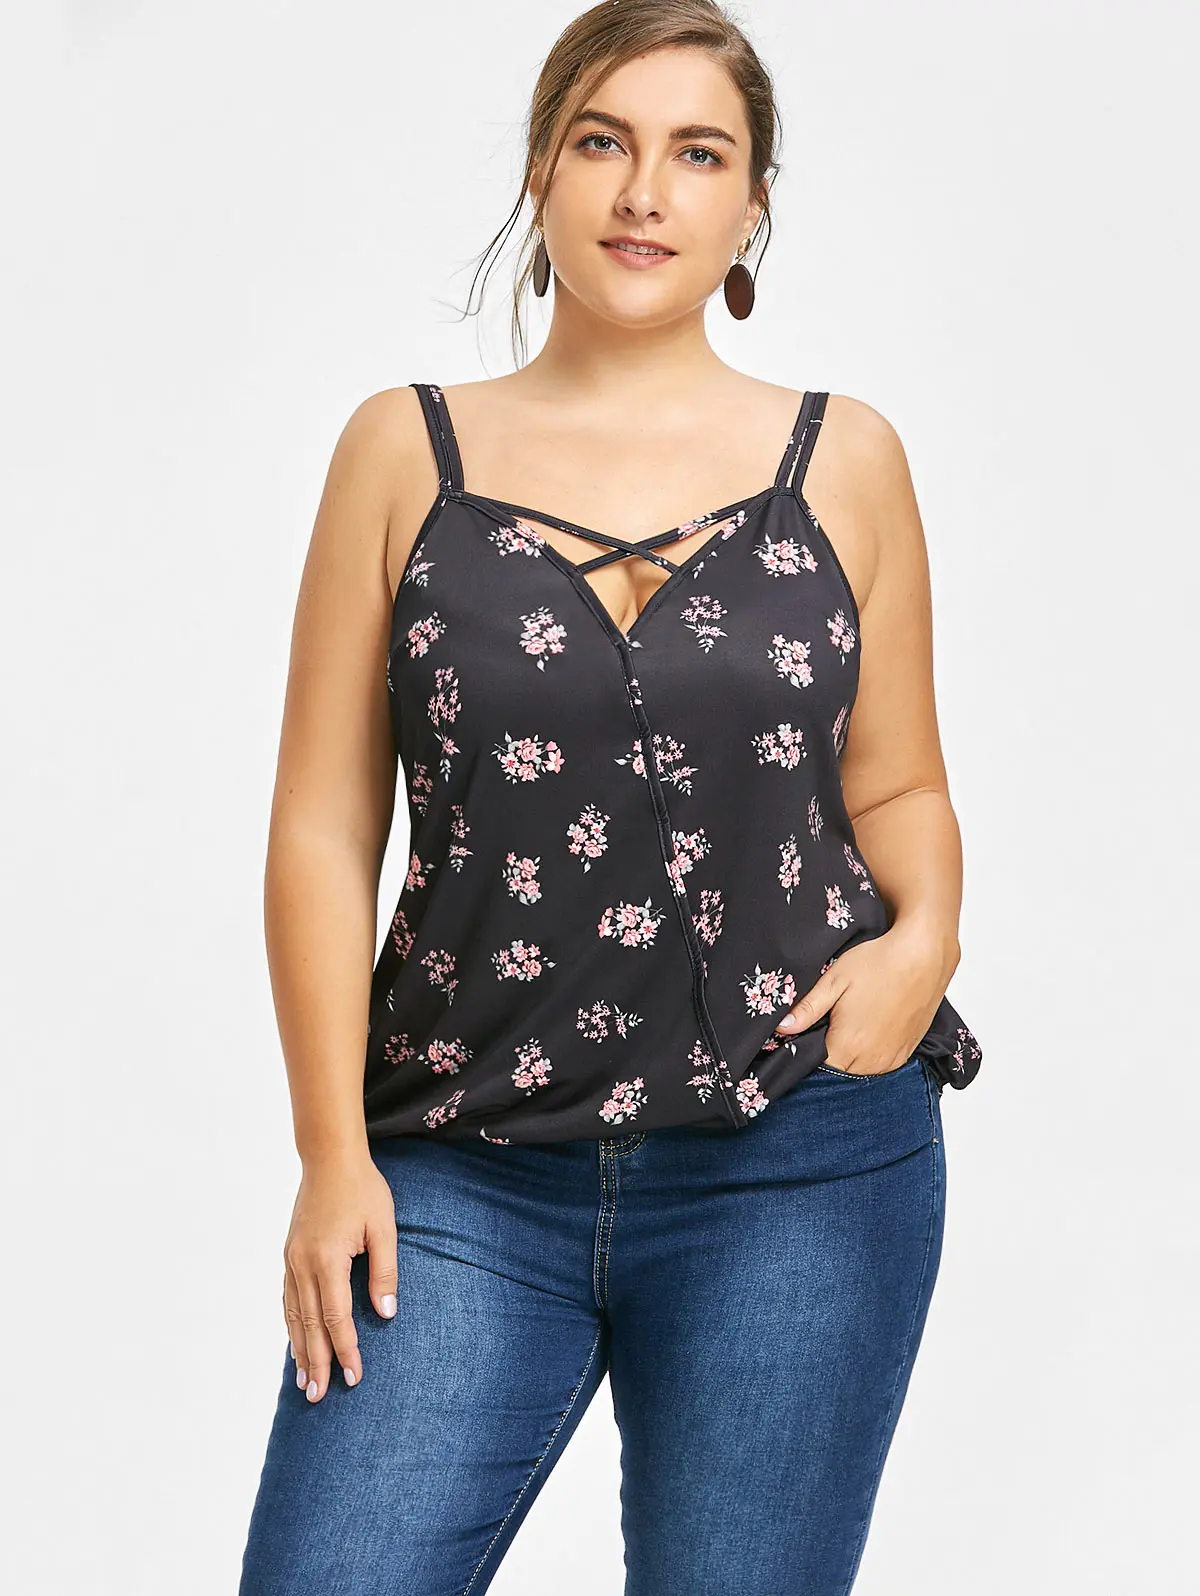 Gamiss Plus Size Cami Floral Print Criss Cross Top Floral Bustier Tank 